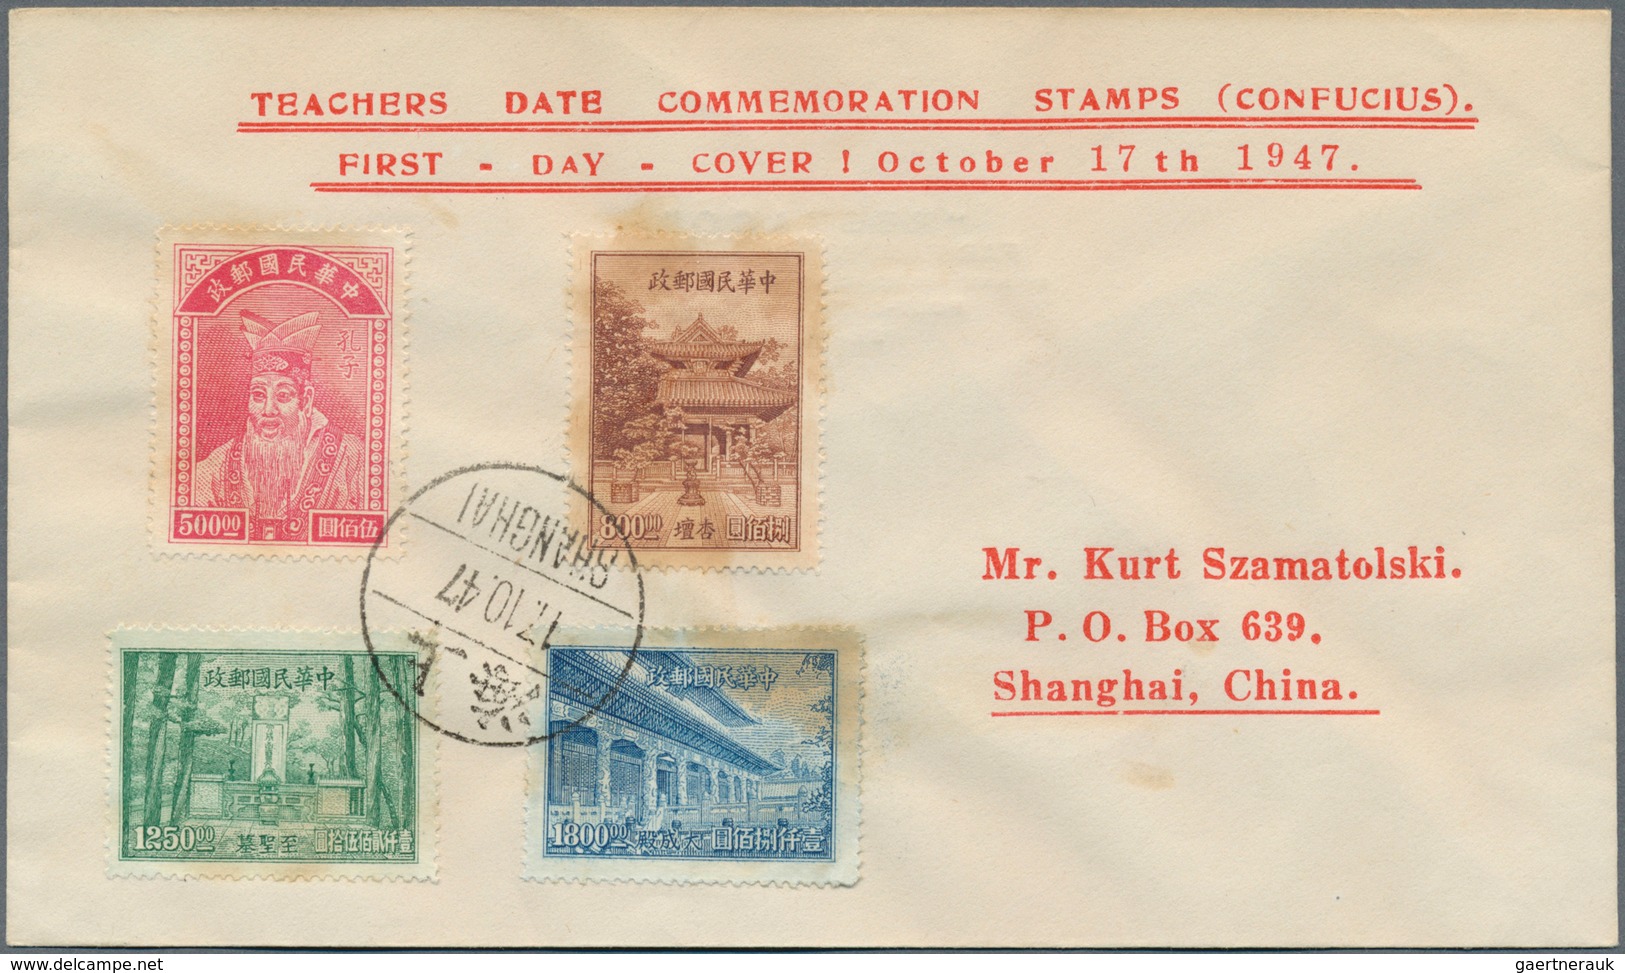 China: 1947/48, FDC (7) all different inc. May 23 SYS torch issue; also 1947 cover to Hong Kong. Tot